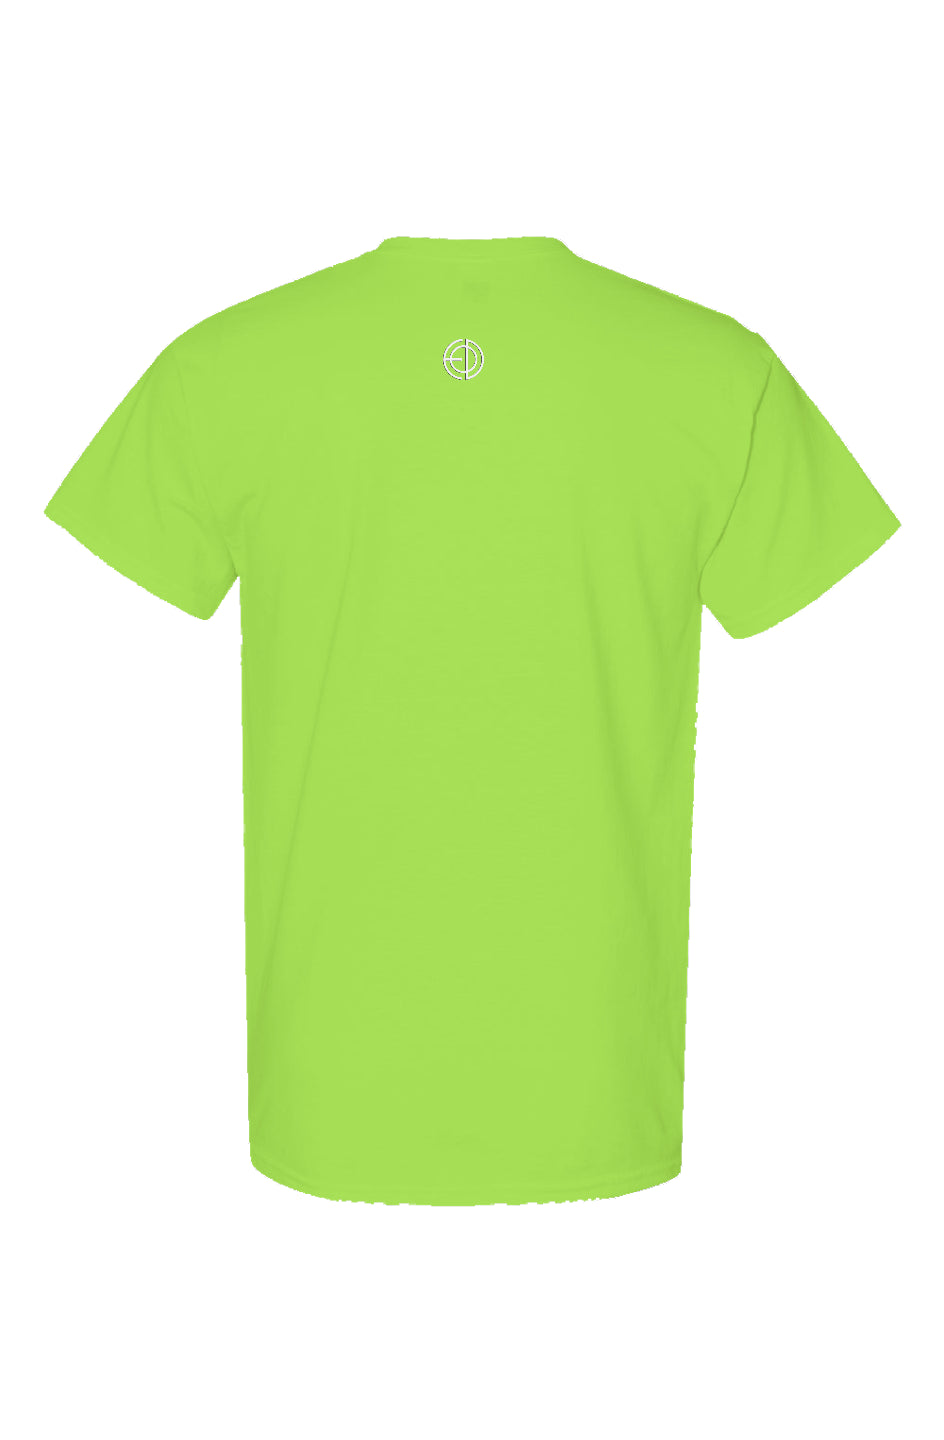 EOD 3OD Neon Tee in Safety Green